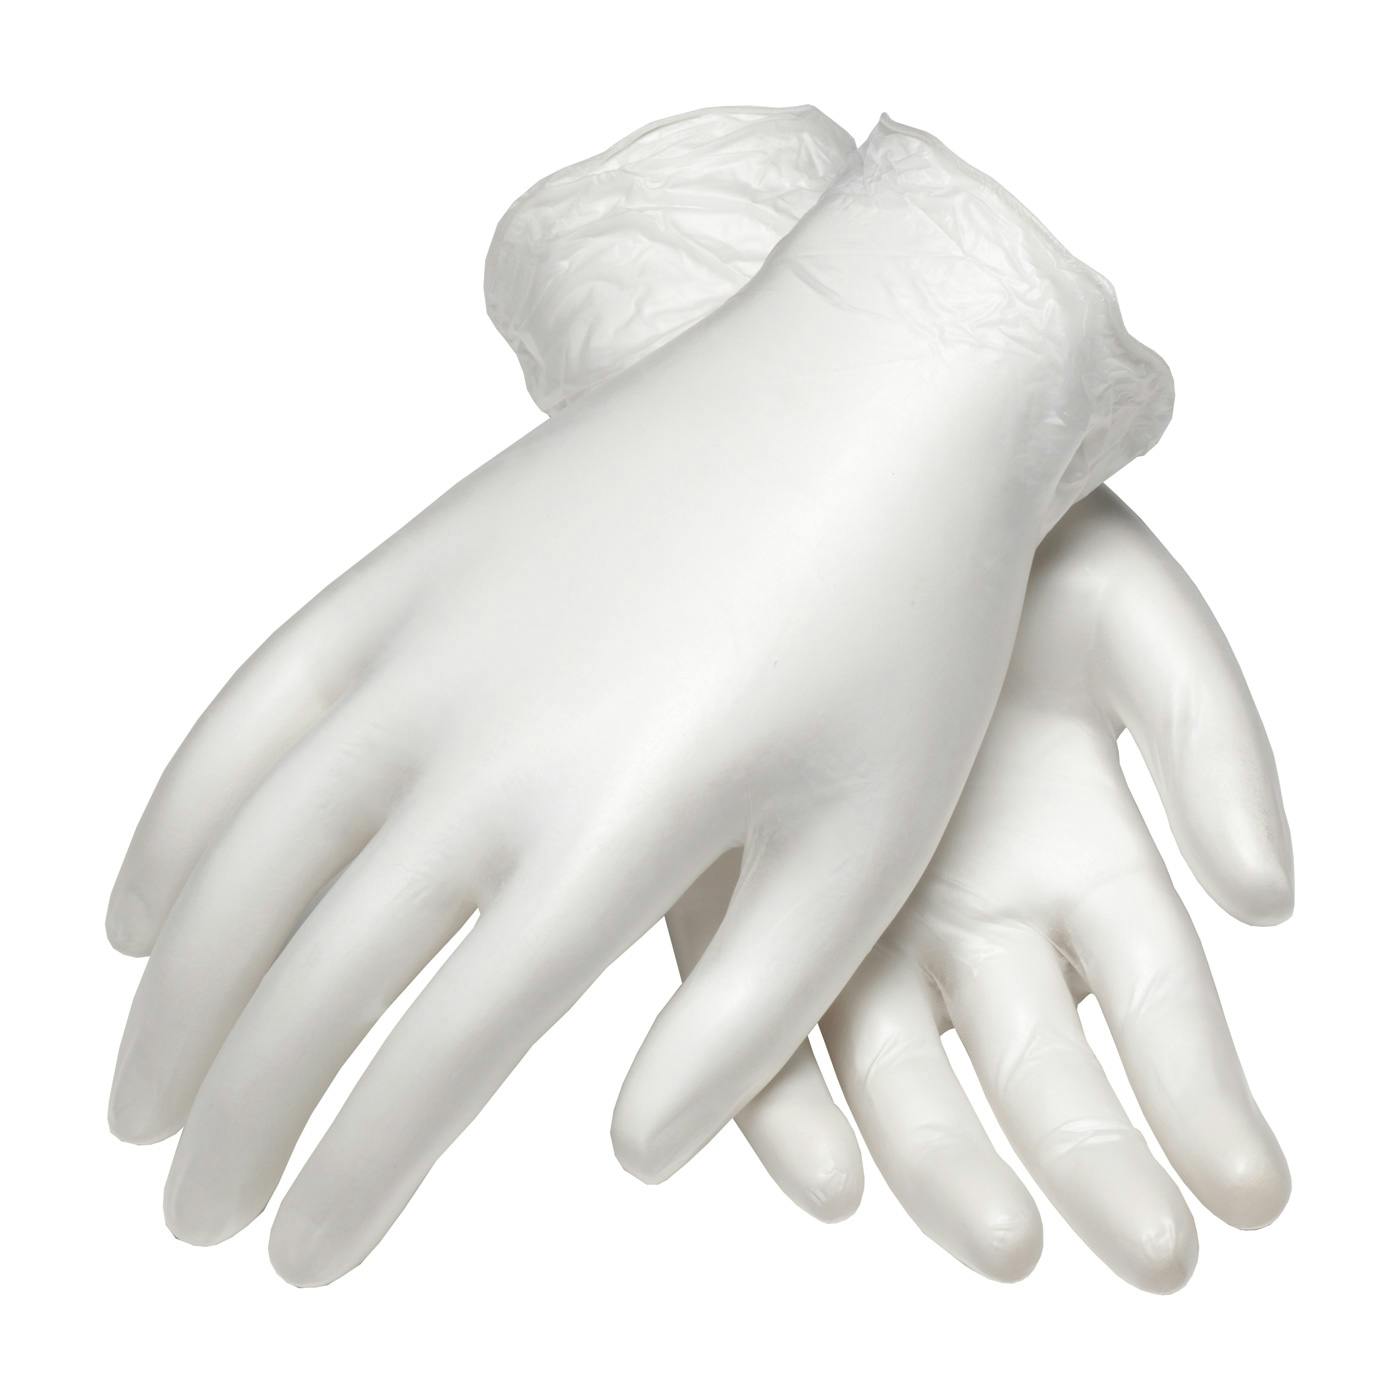 CleanTeam® Single Use Class 100 Cleanroom Vinyl Glove with Finger Textured Grip - 9.5" (100-2824)